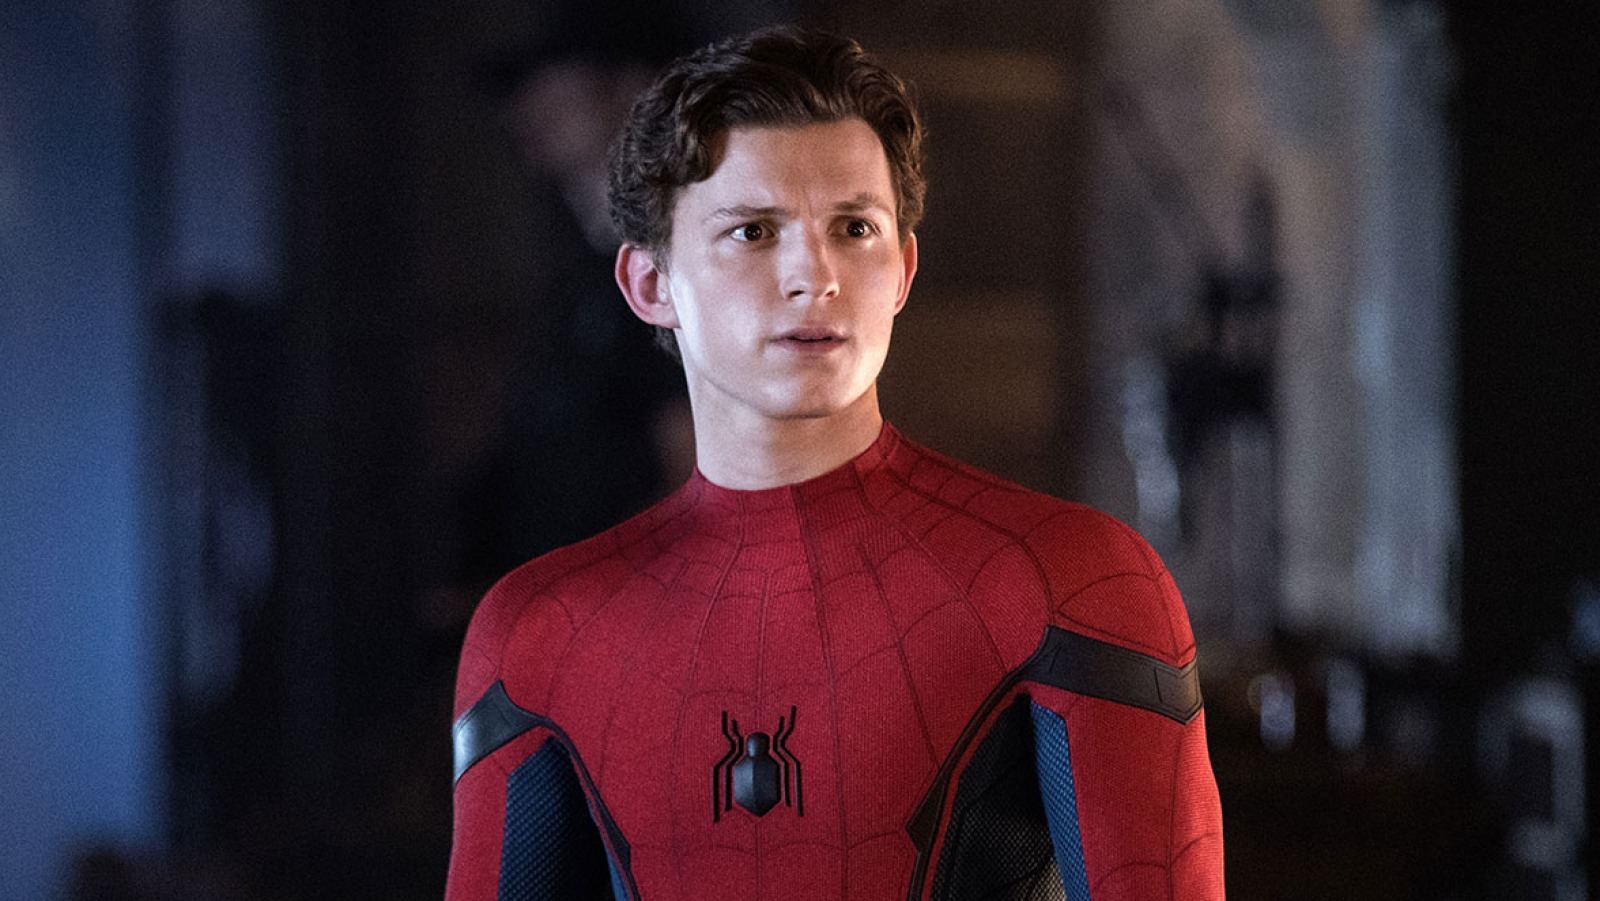 Spider-Man: Homecoming director on learning Marvel universe's secrets